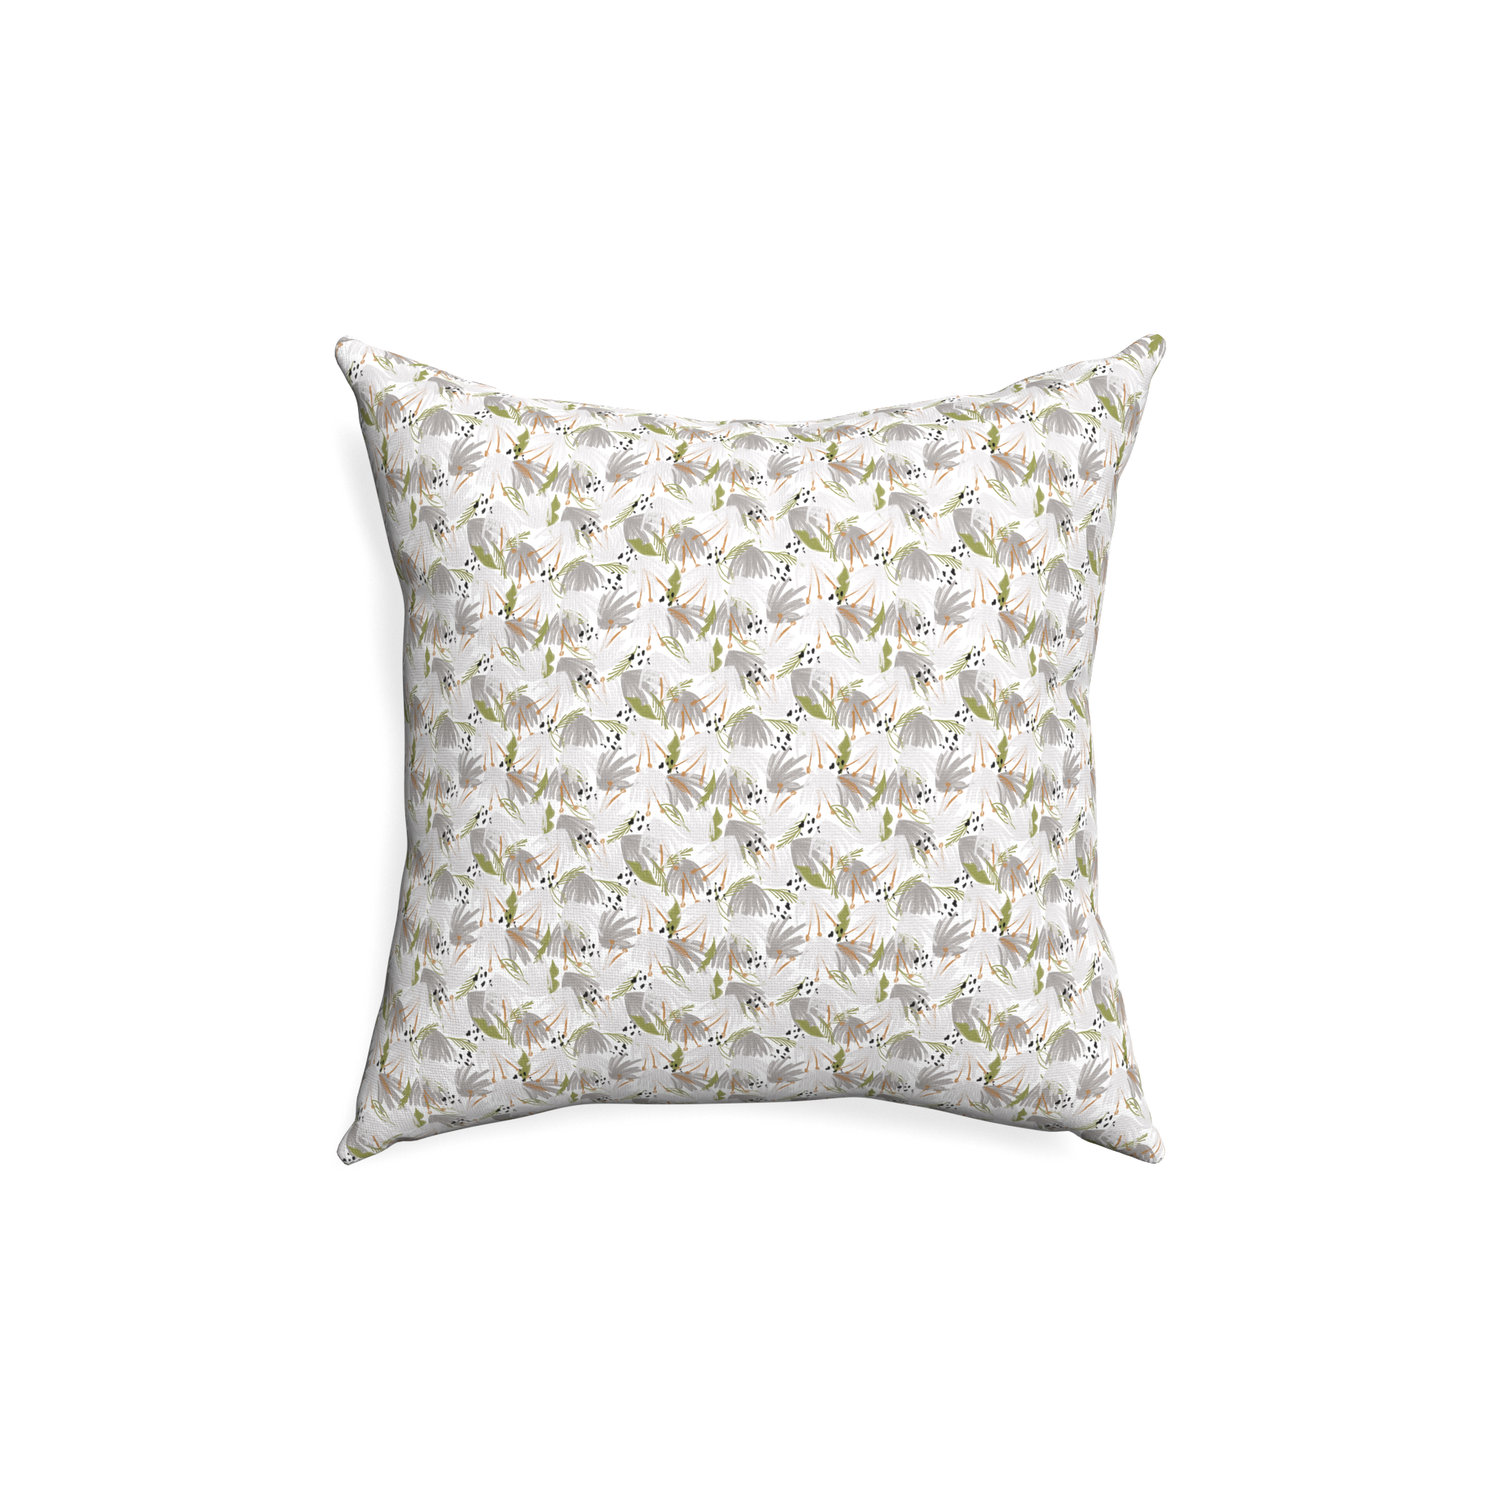 18-square eden grey custom pillow with none on white background